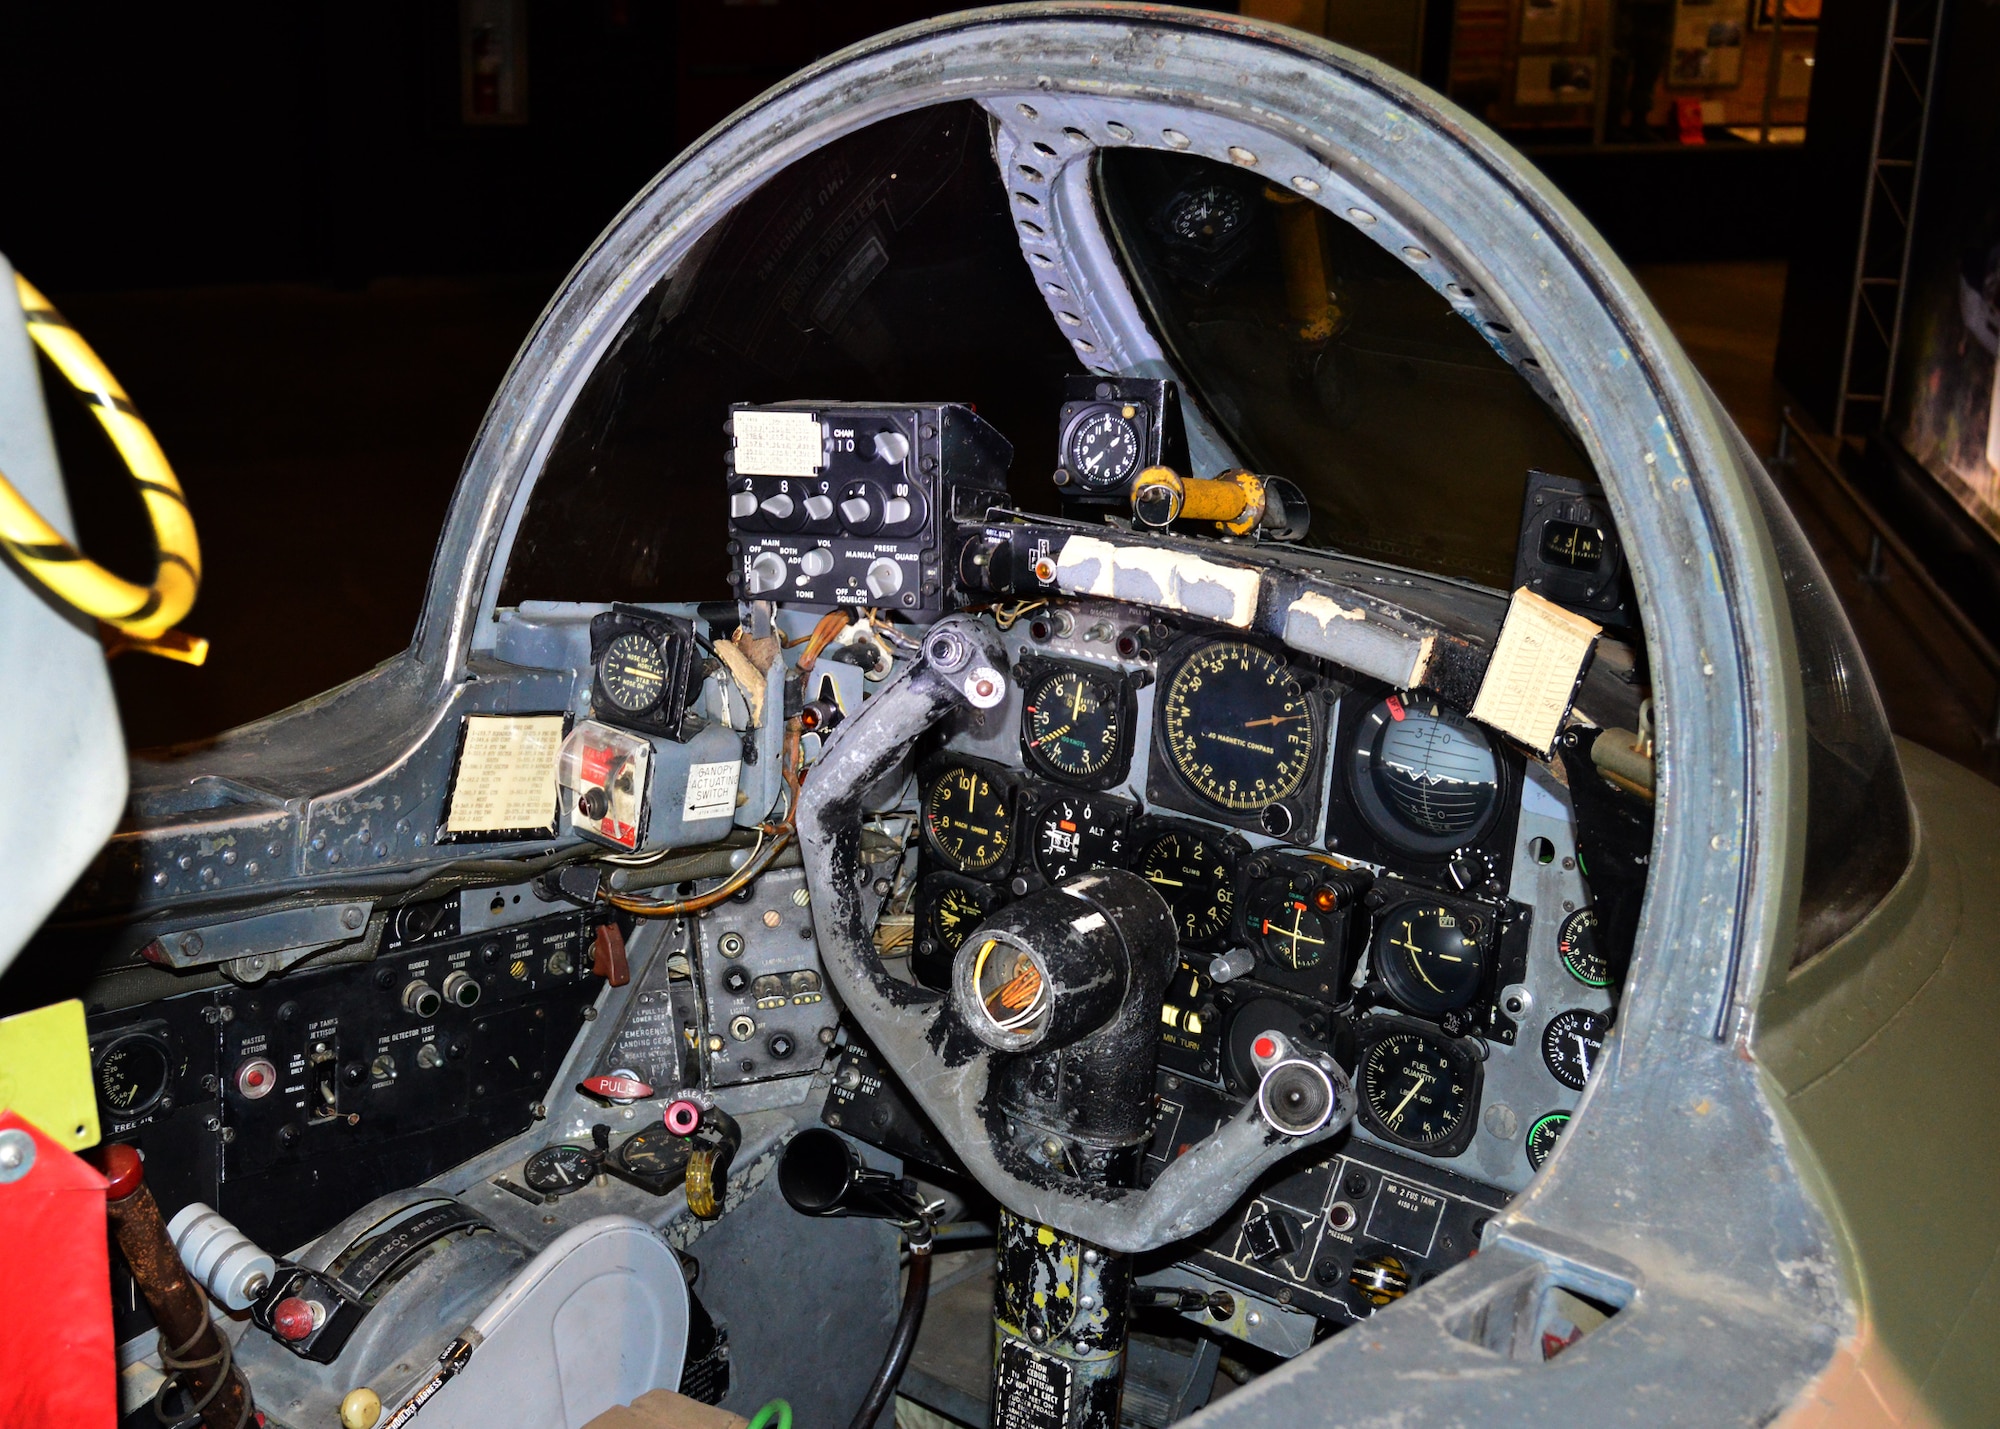 DAYTON, Ohio -- Martin B-57B Canberra front cockpit view in the Southeast Asia War Gallery at the National Museum of the U.S. Air Force. (U.S. Air Force photo by Ken LaRock)